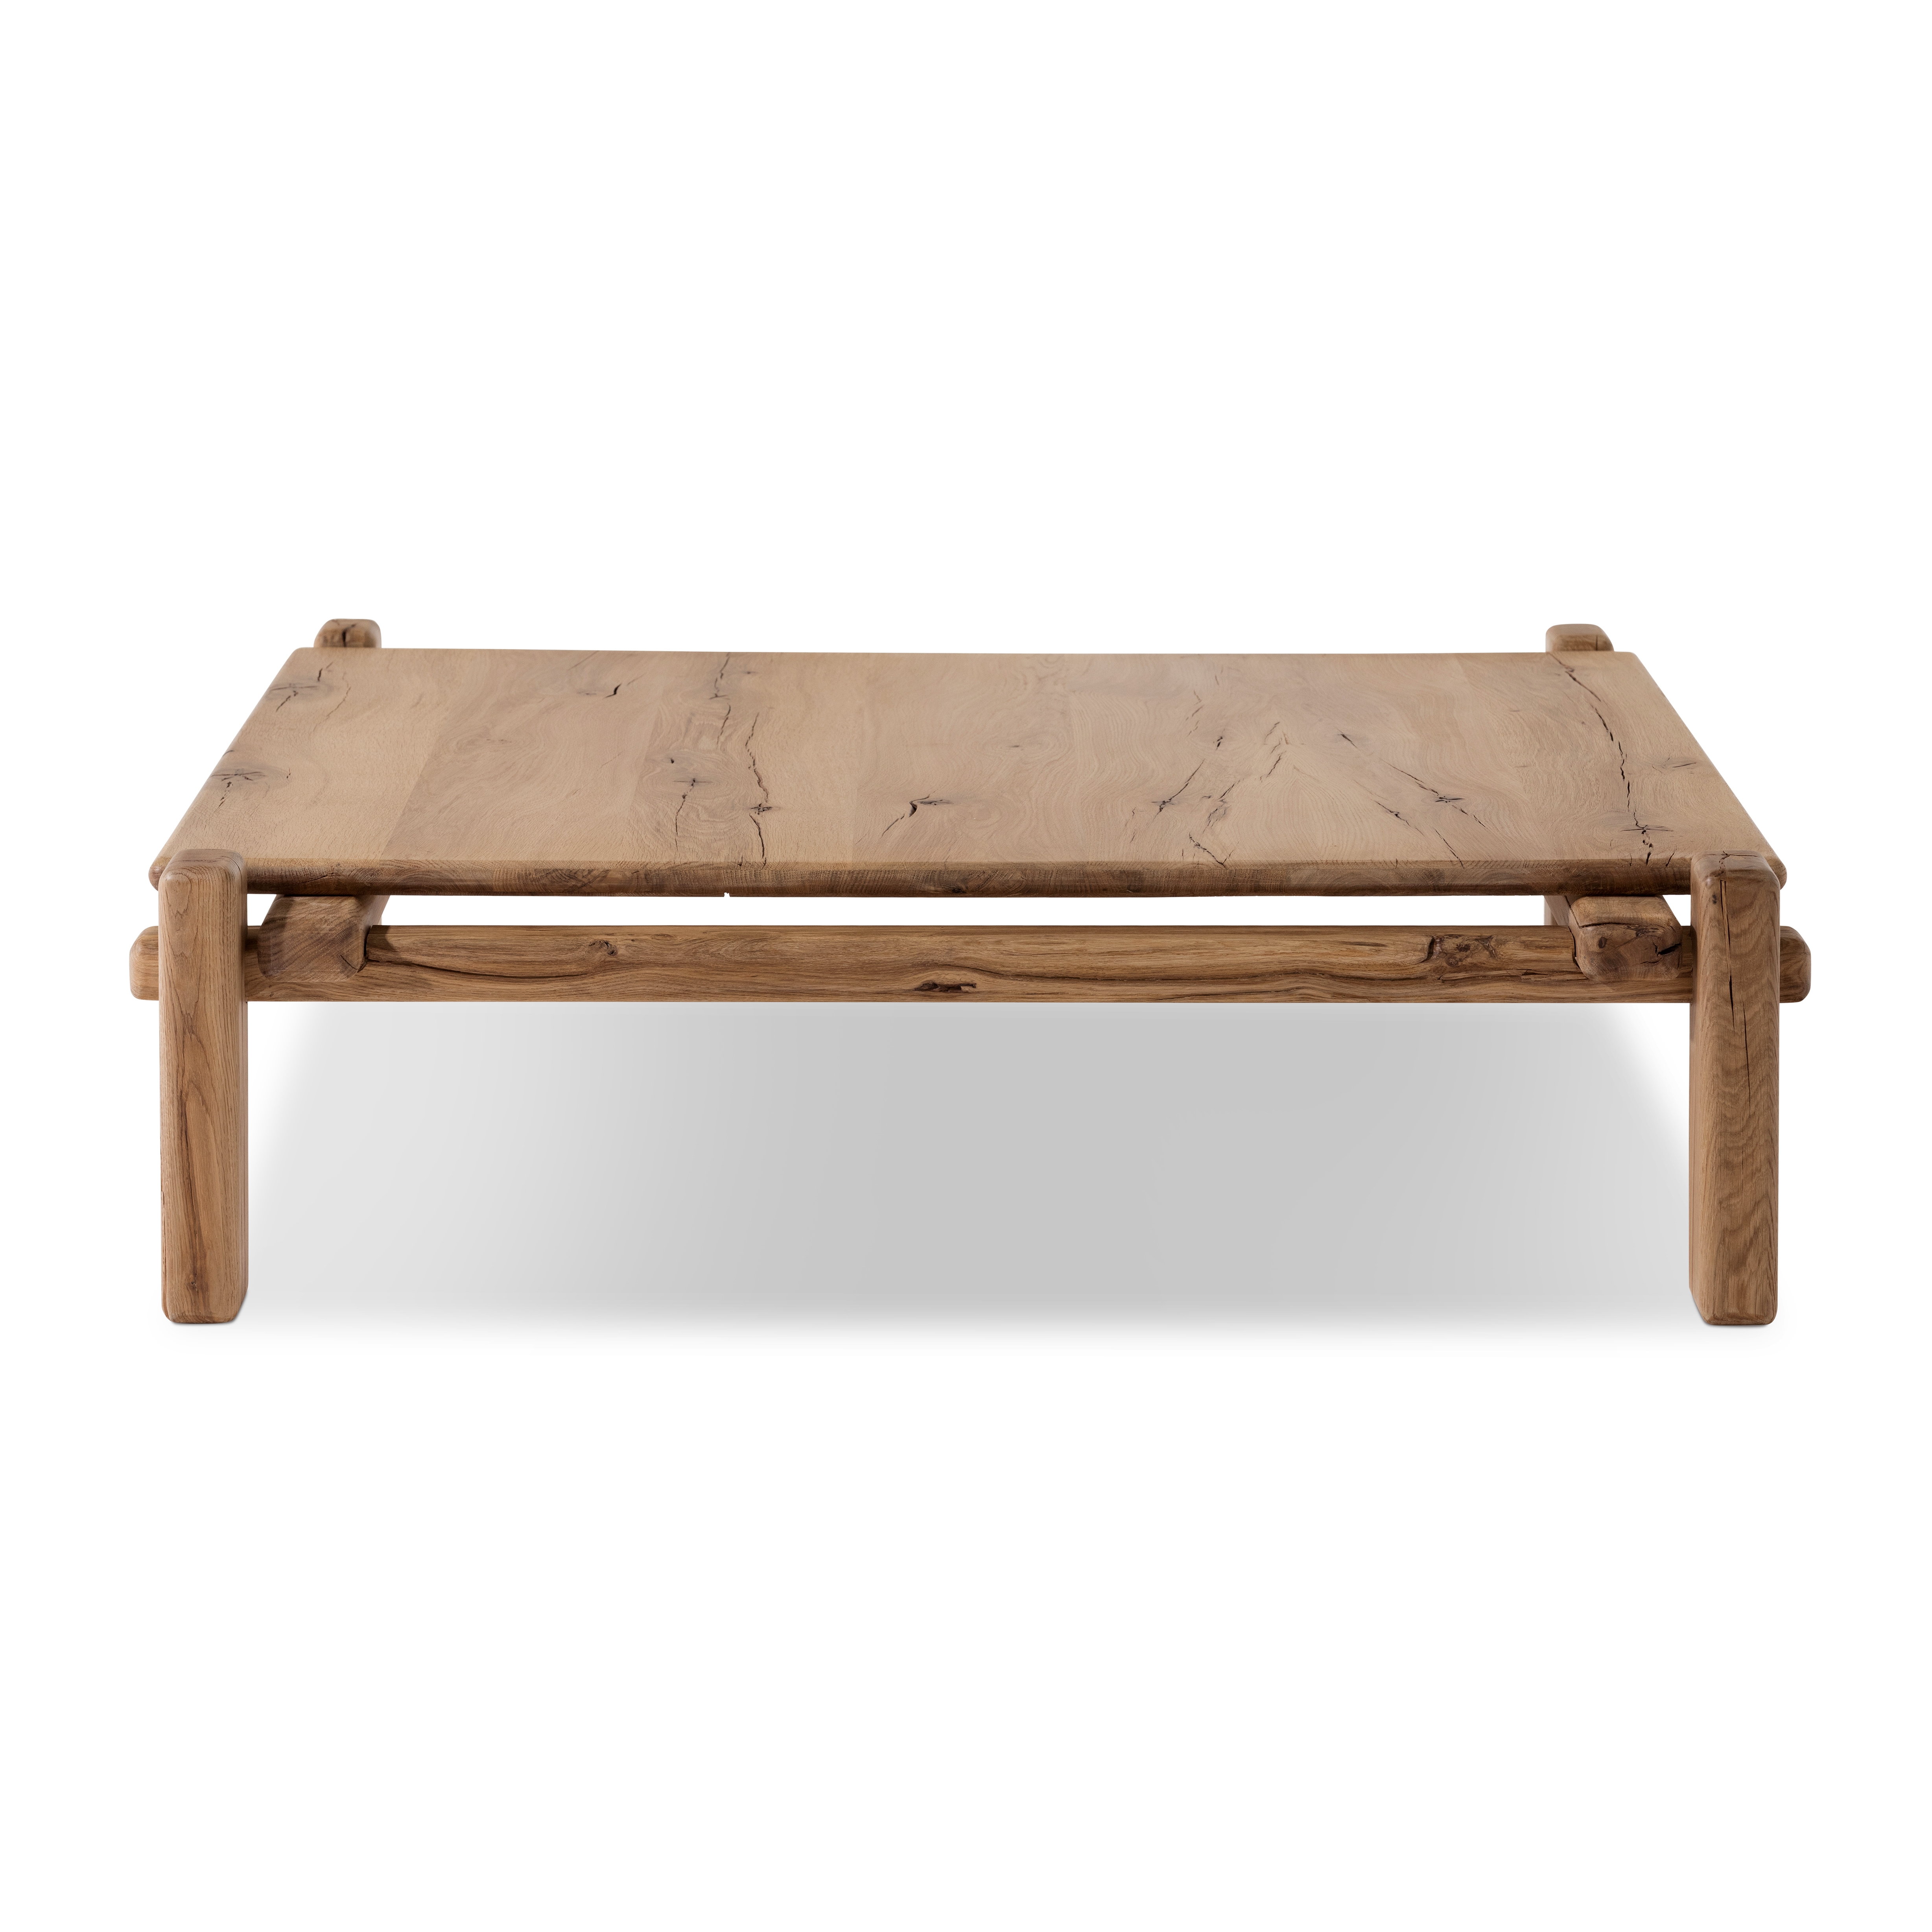 Marcia Square Coffee Table-French Oak - Image 4